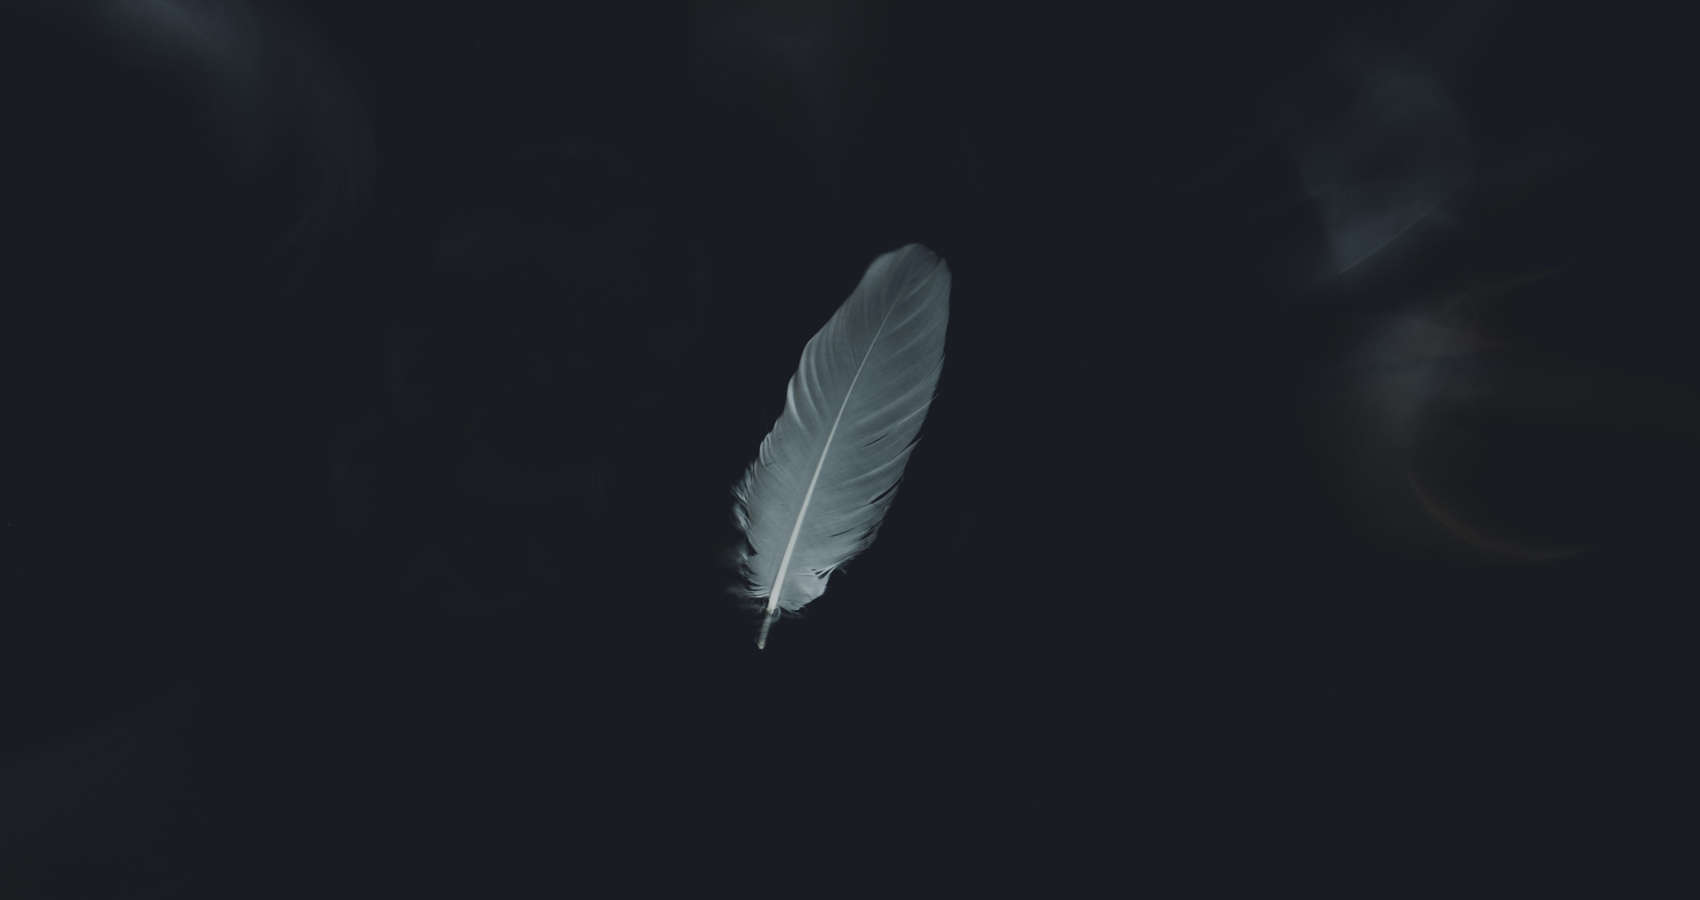 The Feather, story by Leonard Ifeanyi Ugwu, Jr. at Spillwords.com